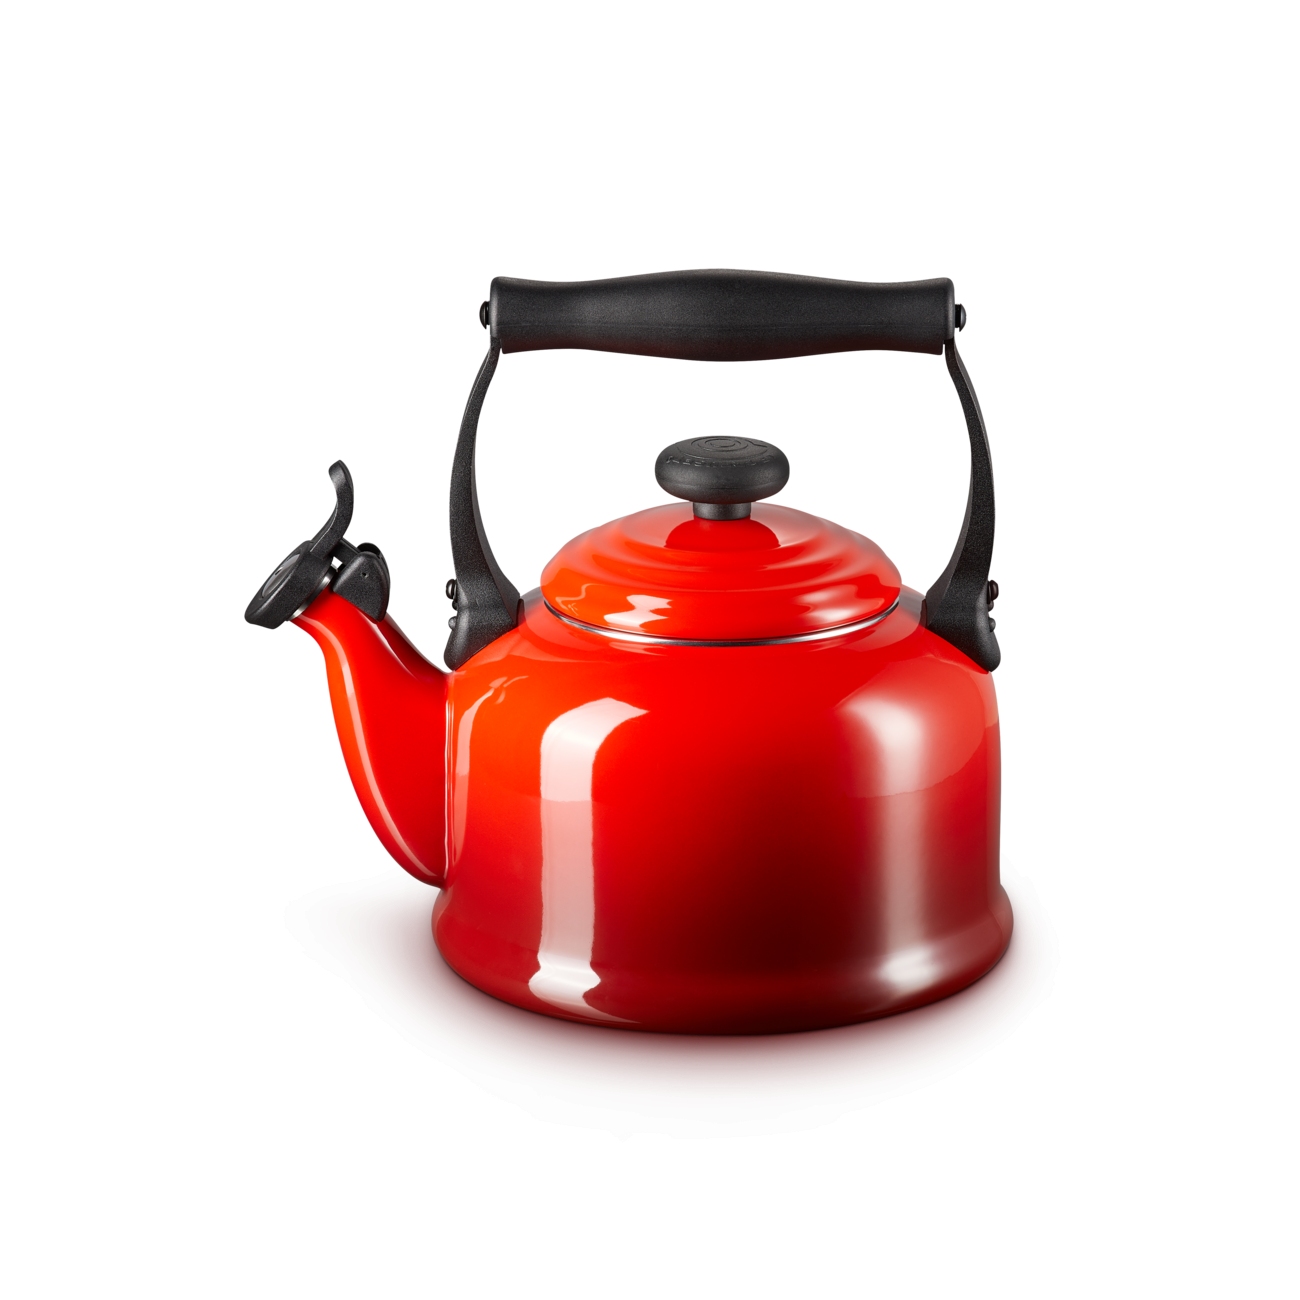 Le Creuset Tradition Kettle Cherry